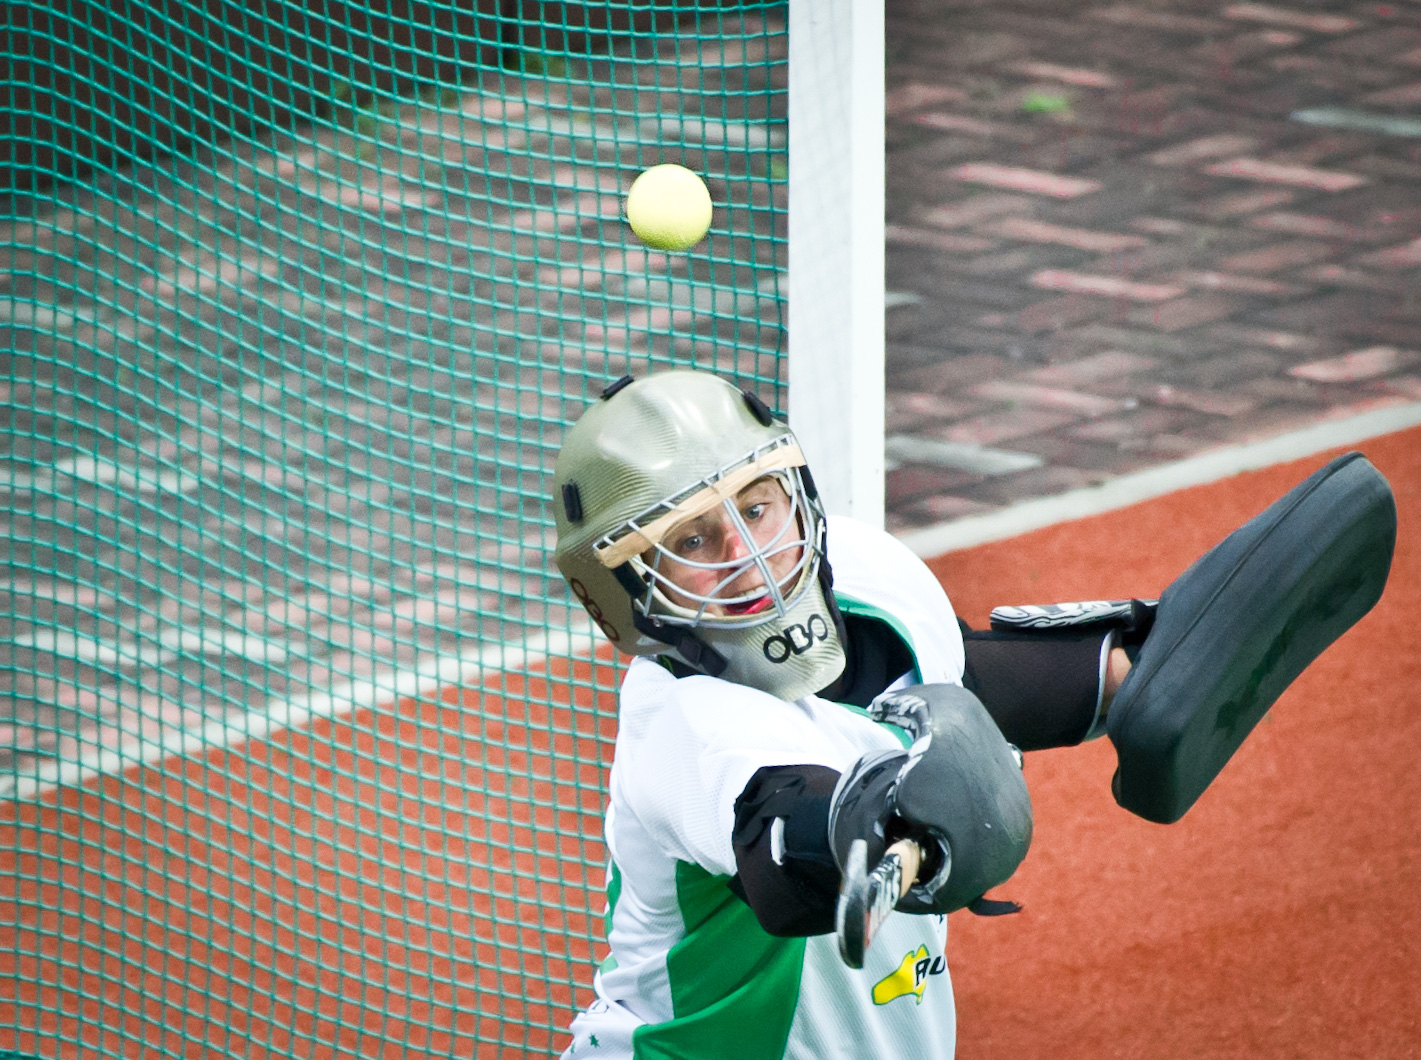 An Australian goal keeper looks on as the ball passes her during the TPG international tri series hockey match at the Sengkang Sports Complex.